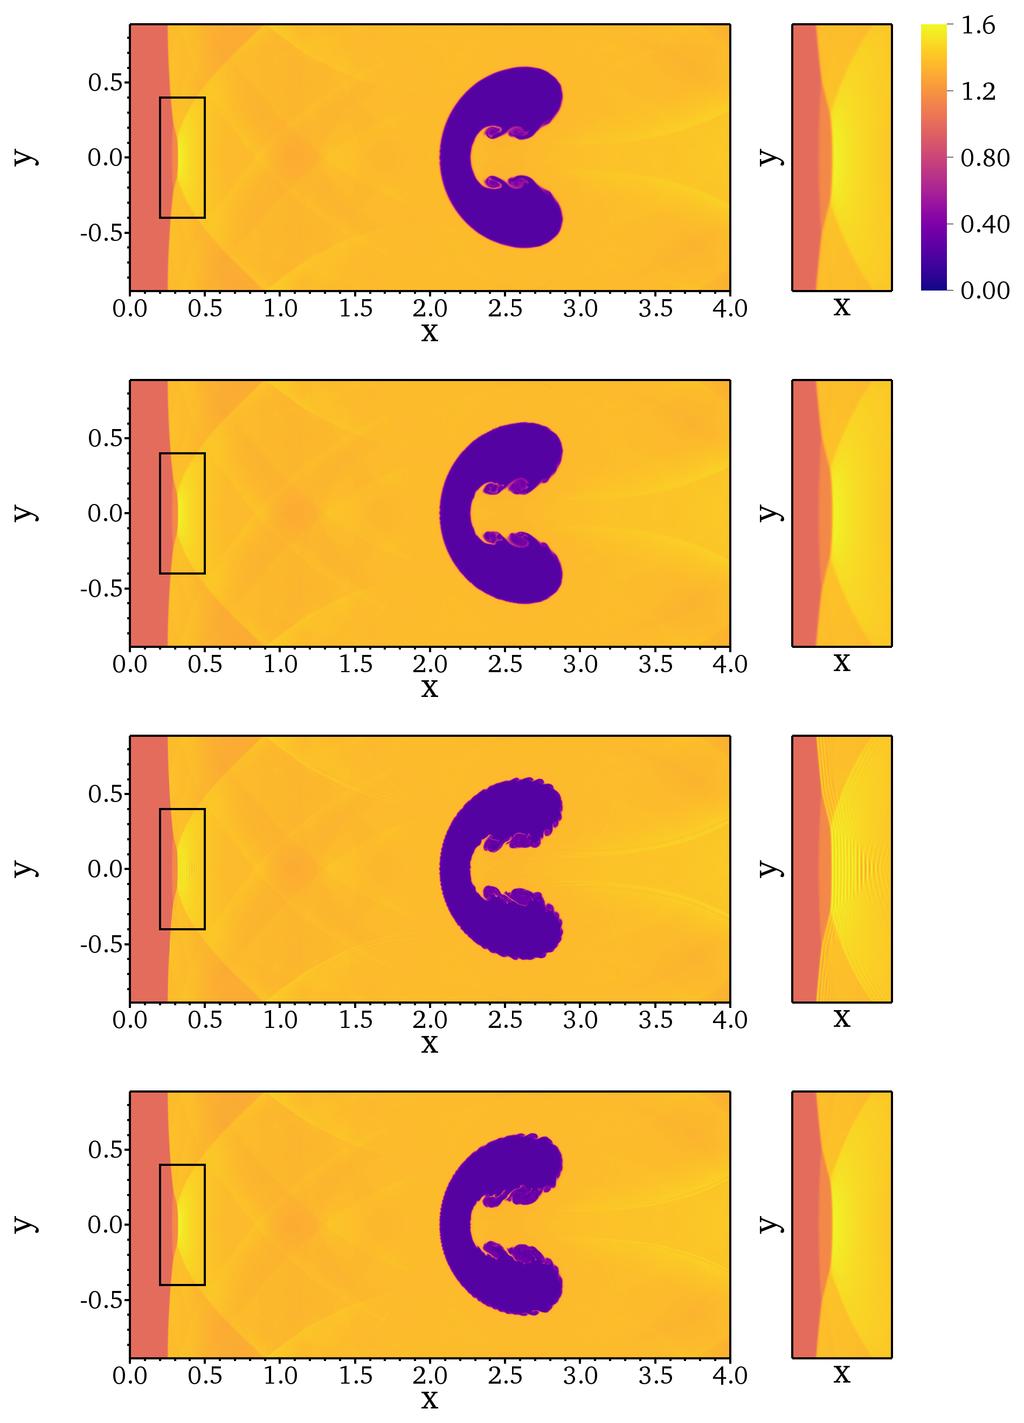 Figure 8: Density plots of various schemes for the shock-cylinder interaction problem at t = 3.5. Top row: WCNS5-JS; second row: WCNS5-Z; third row: WCNS6-CU-M; bottom row: WCNS6-LD.